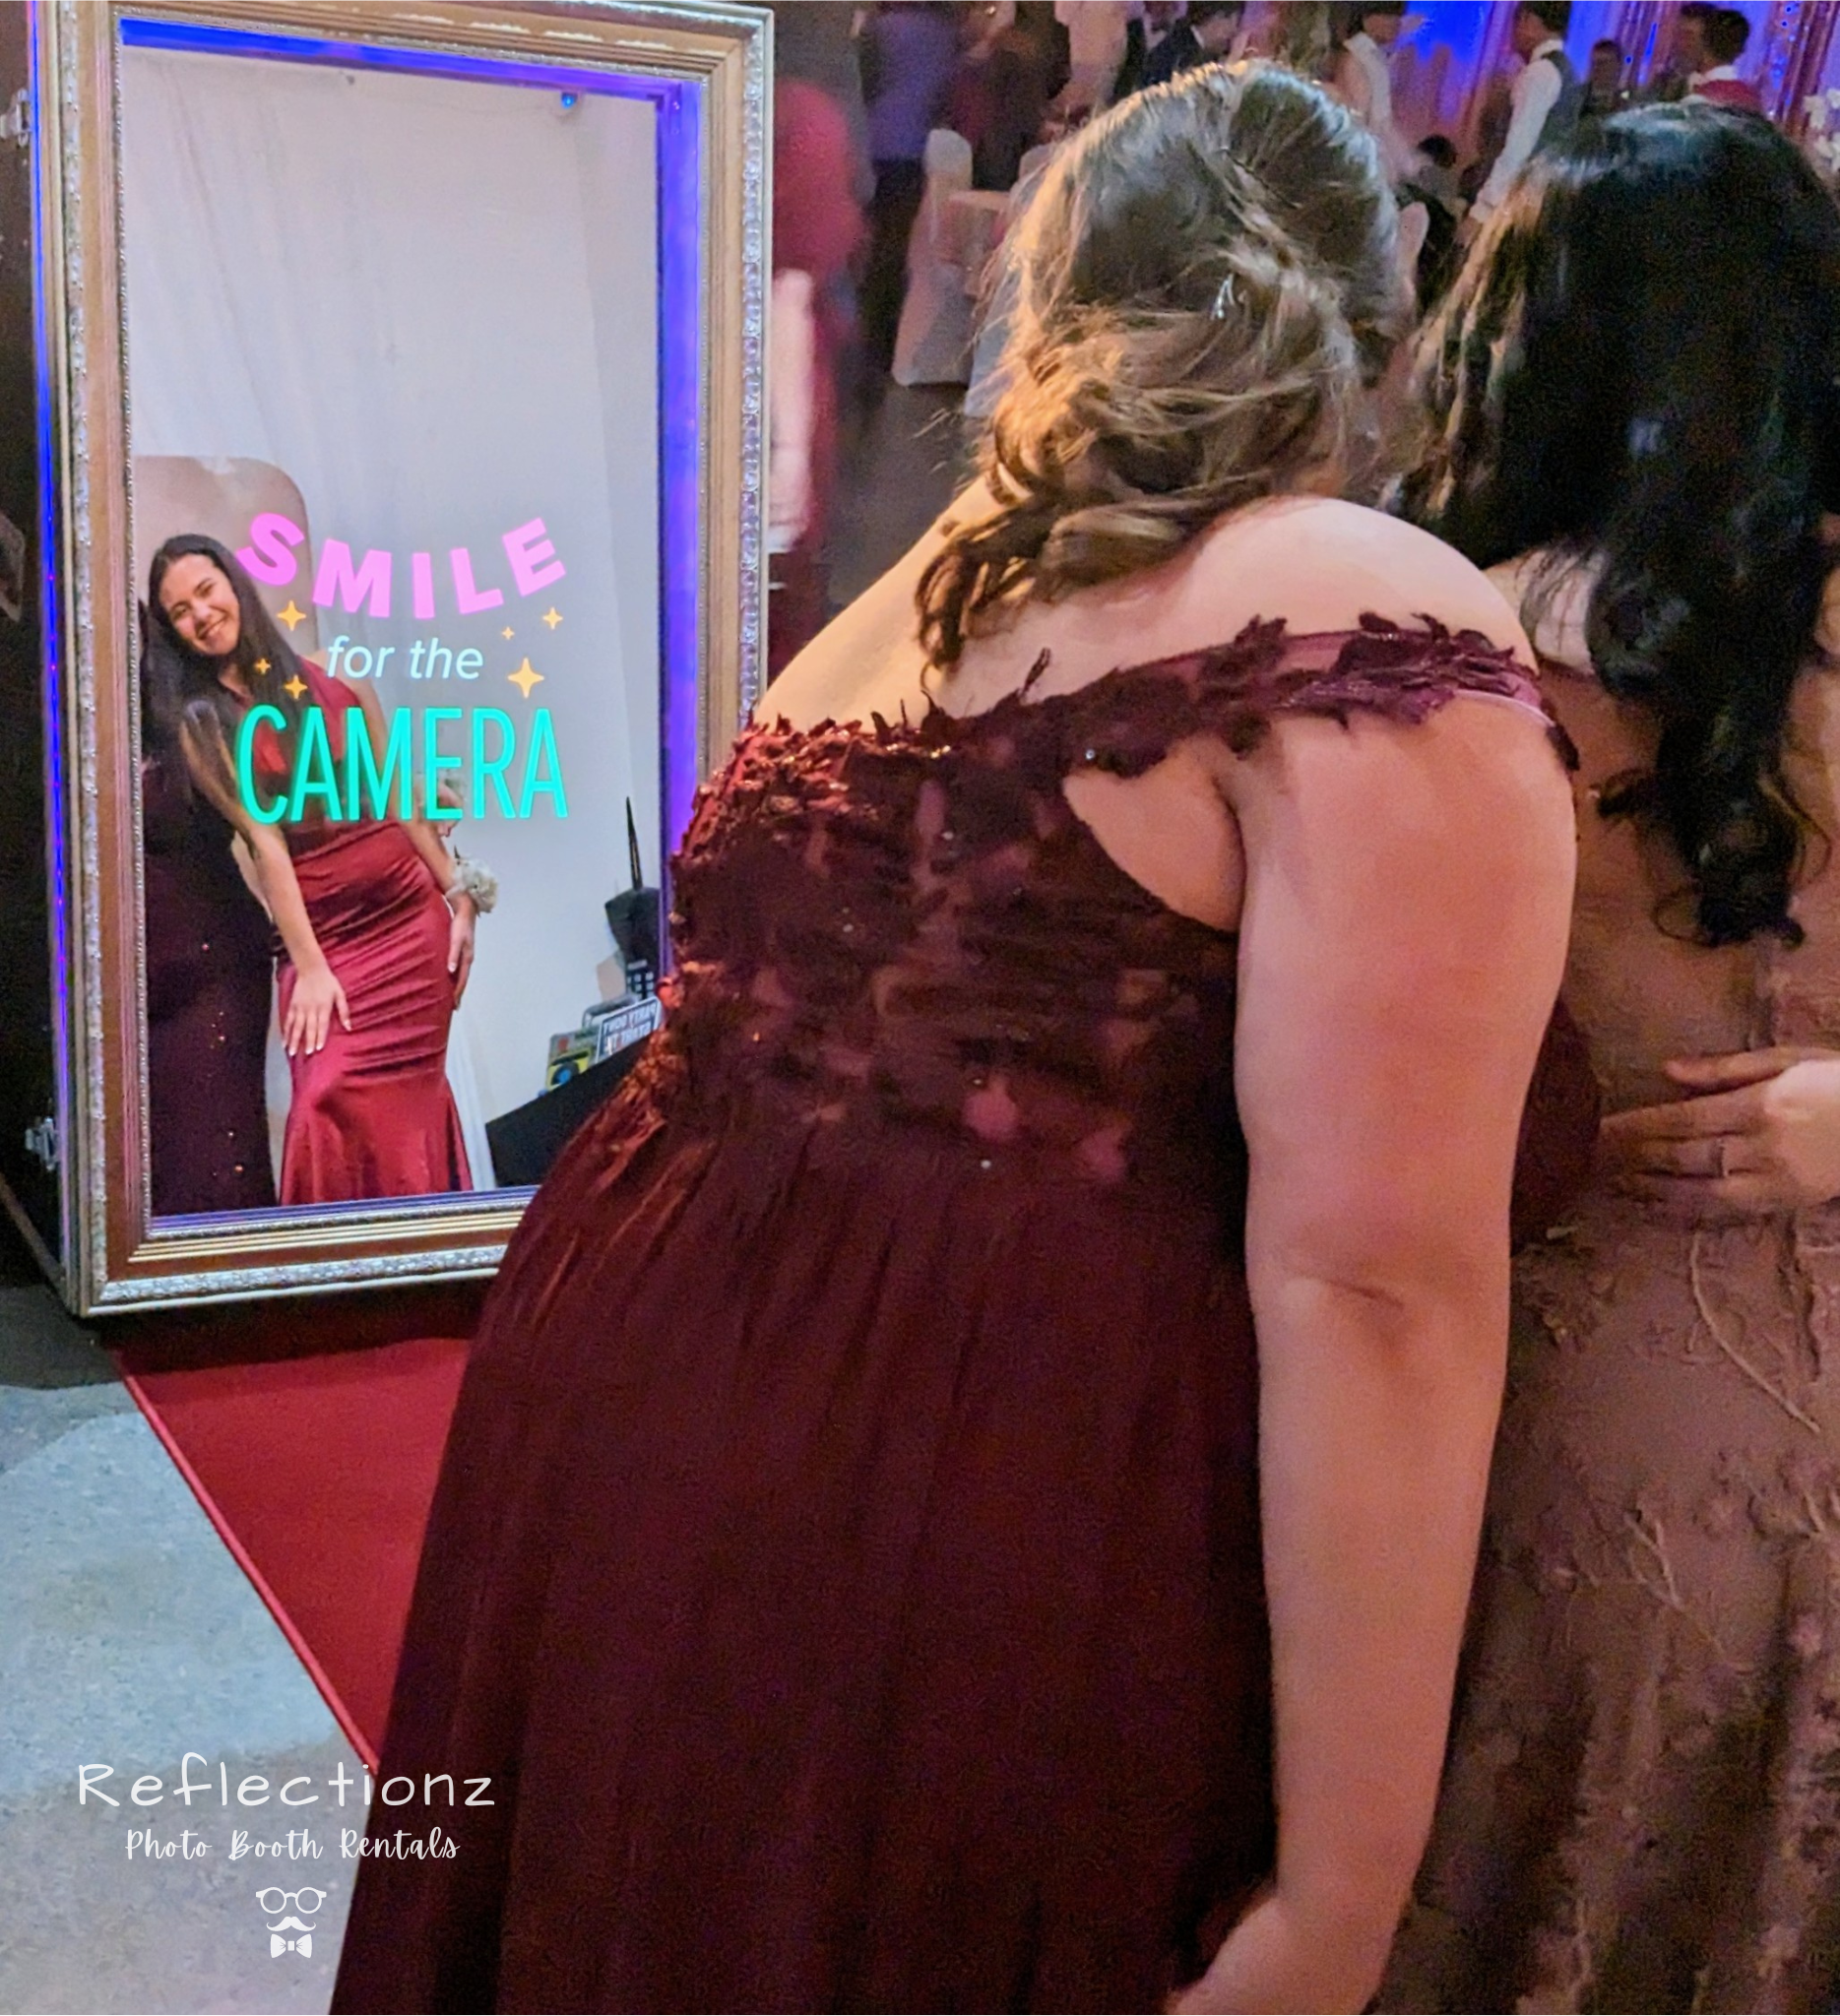 Guests posing in front of a magic mirror photo booth with 'Smile for the Camera' text.